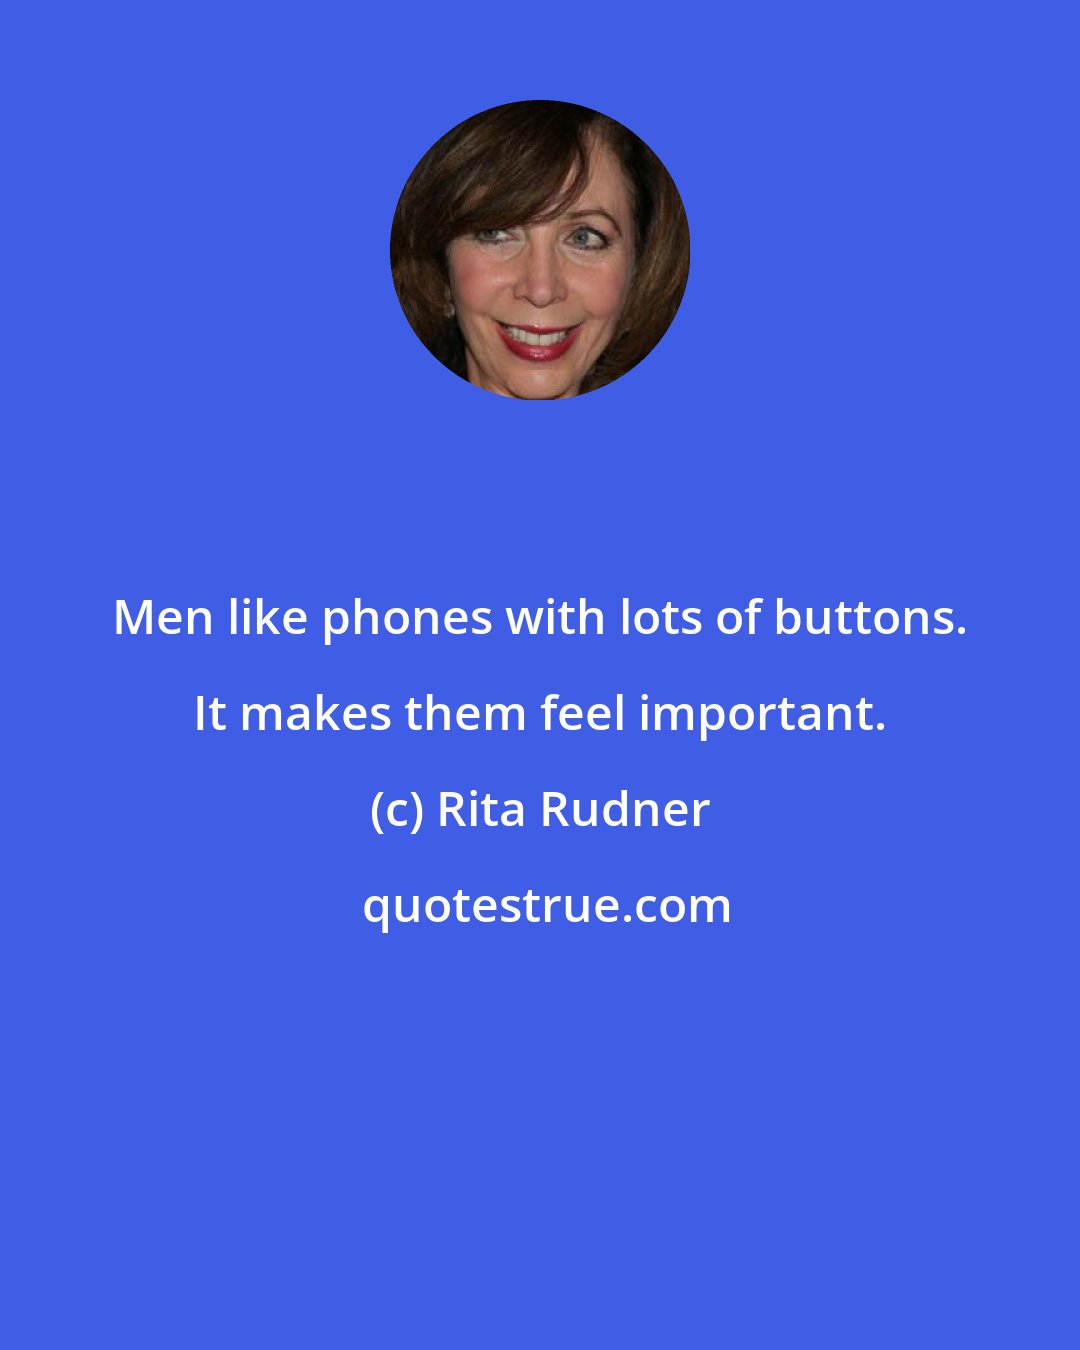 Rita Rudner: Men like phones with lots of buttons. It makes them feel important.